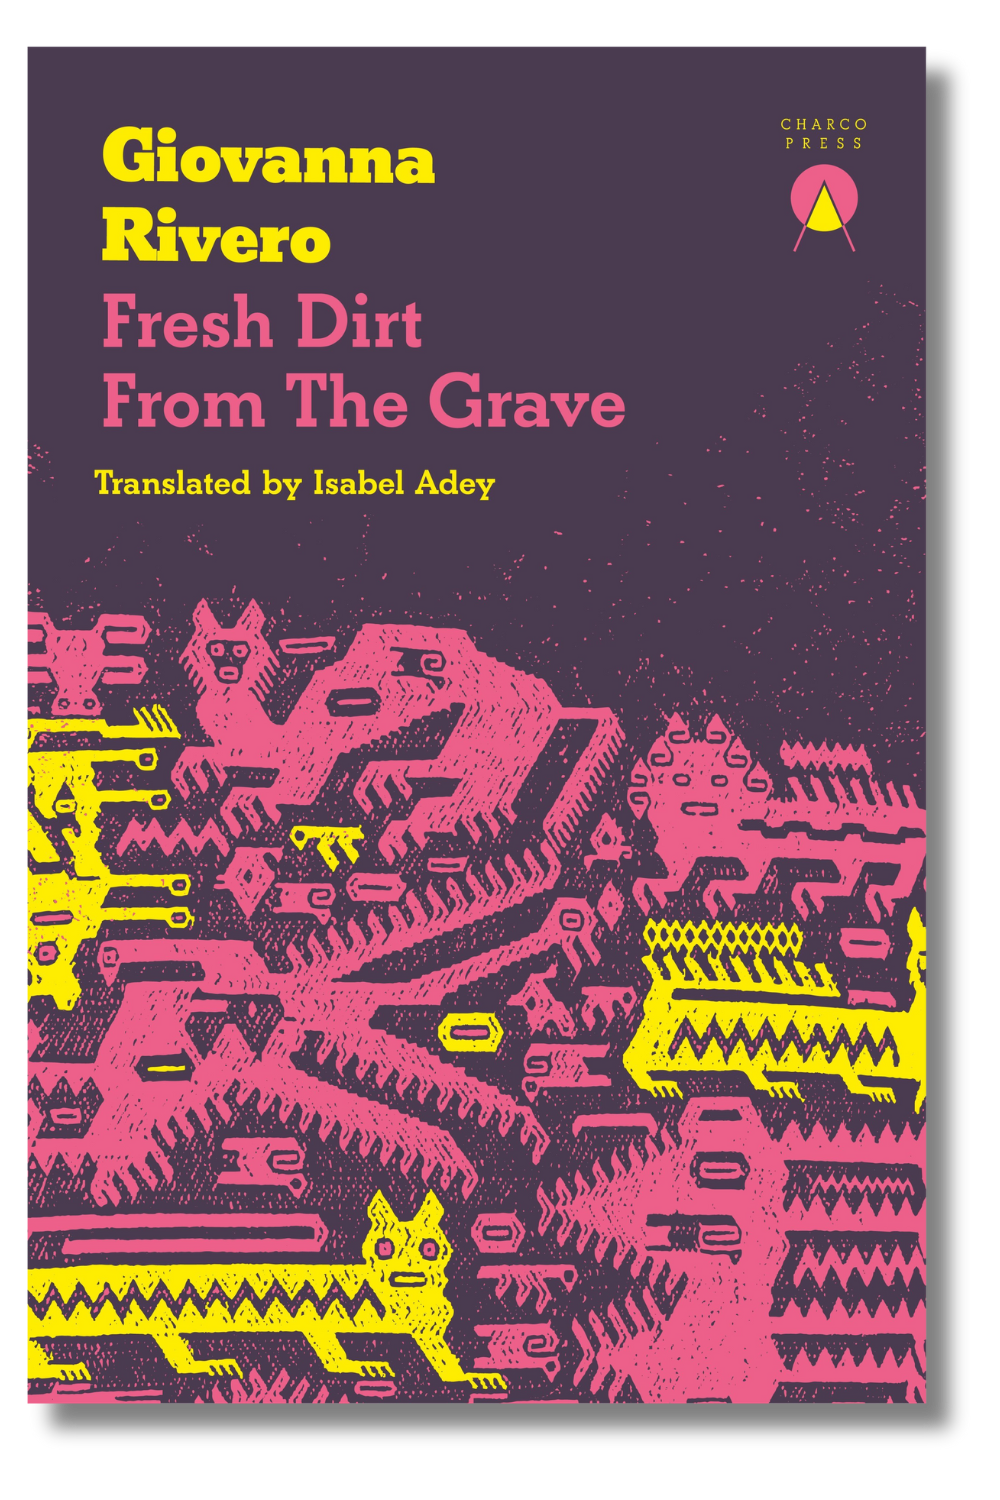 The cover of "Fresh Dirt from the Grave" by Giovanna Rivero